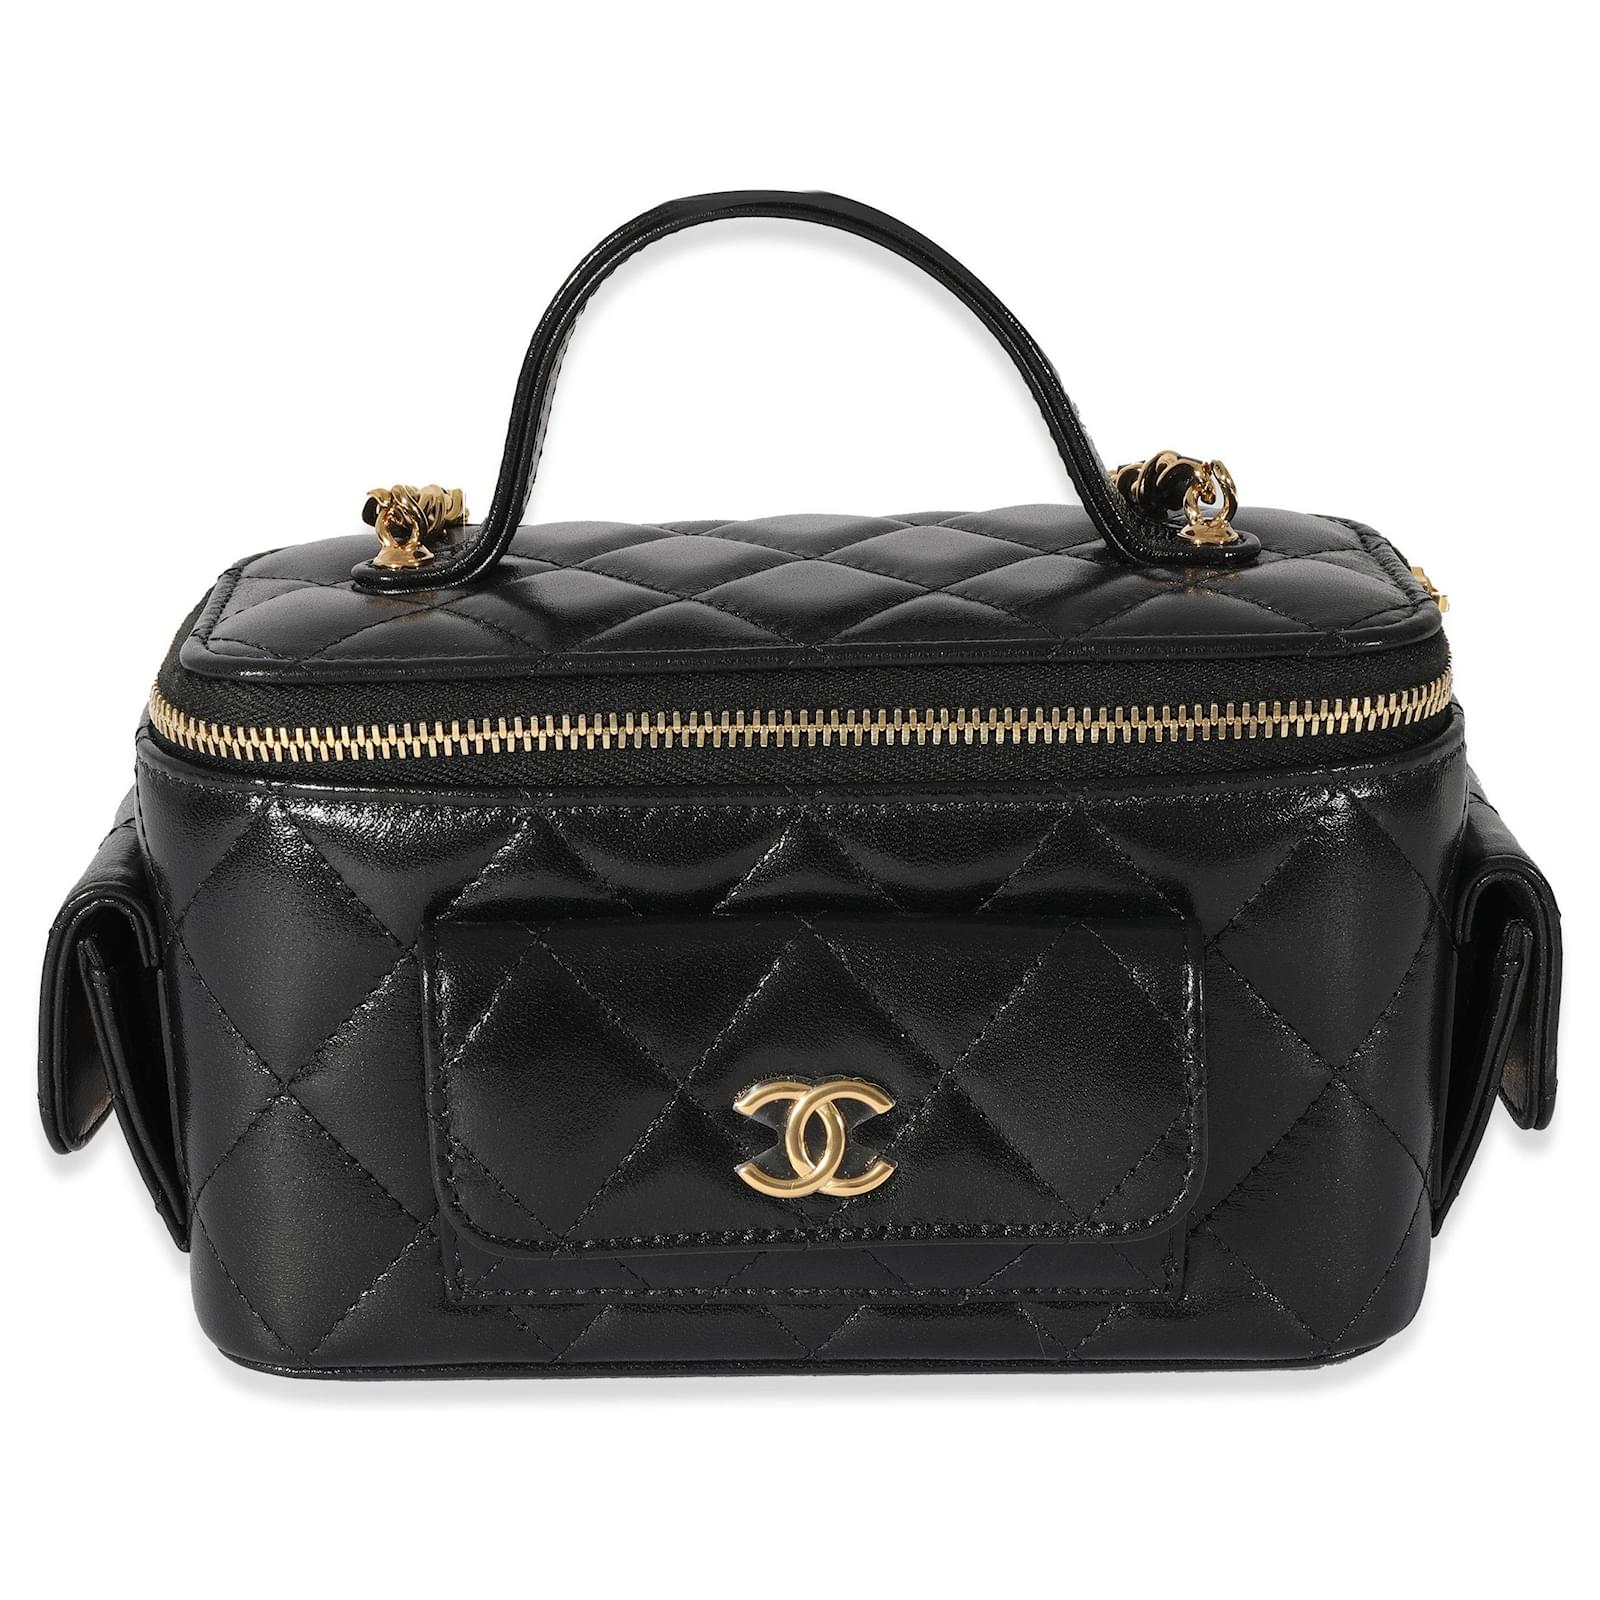 Thoughts about the 22K “IT” bag - Coco First